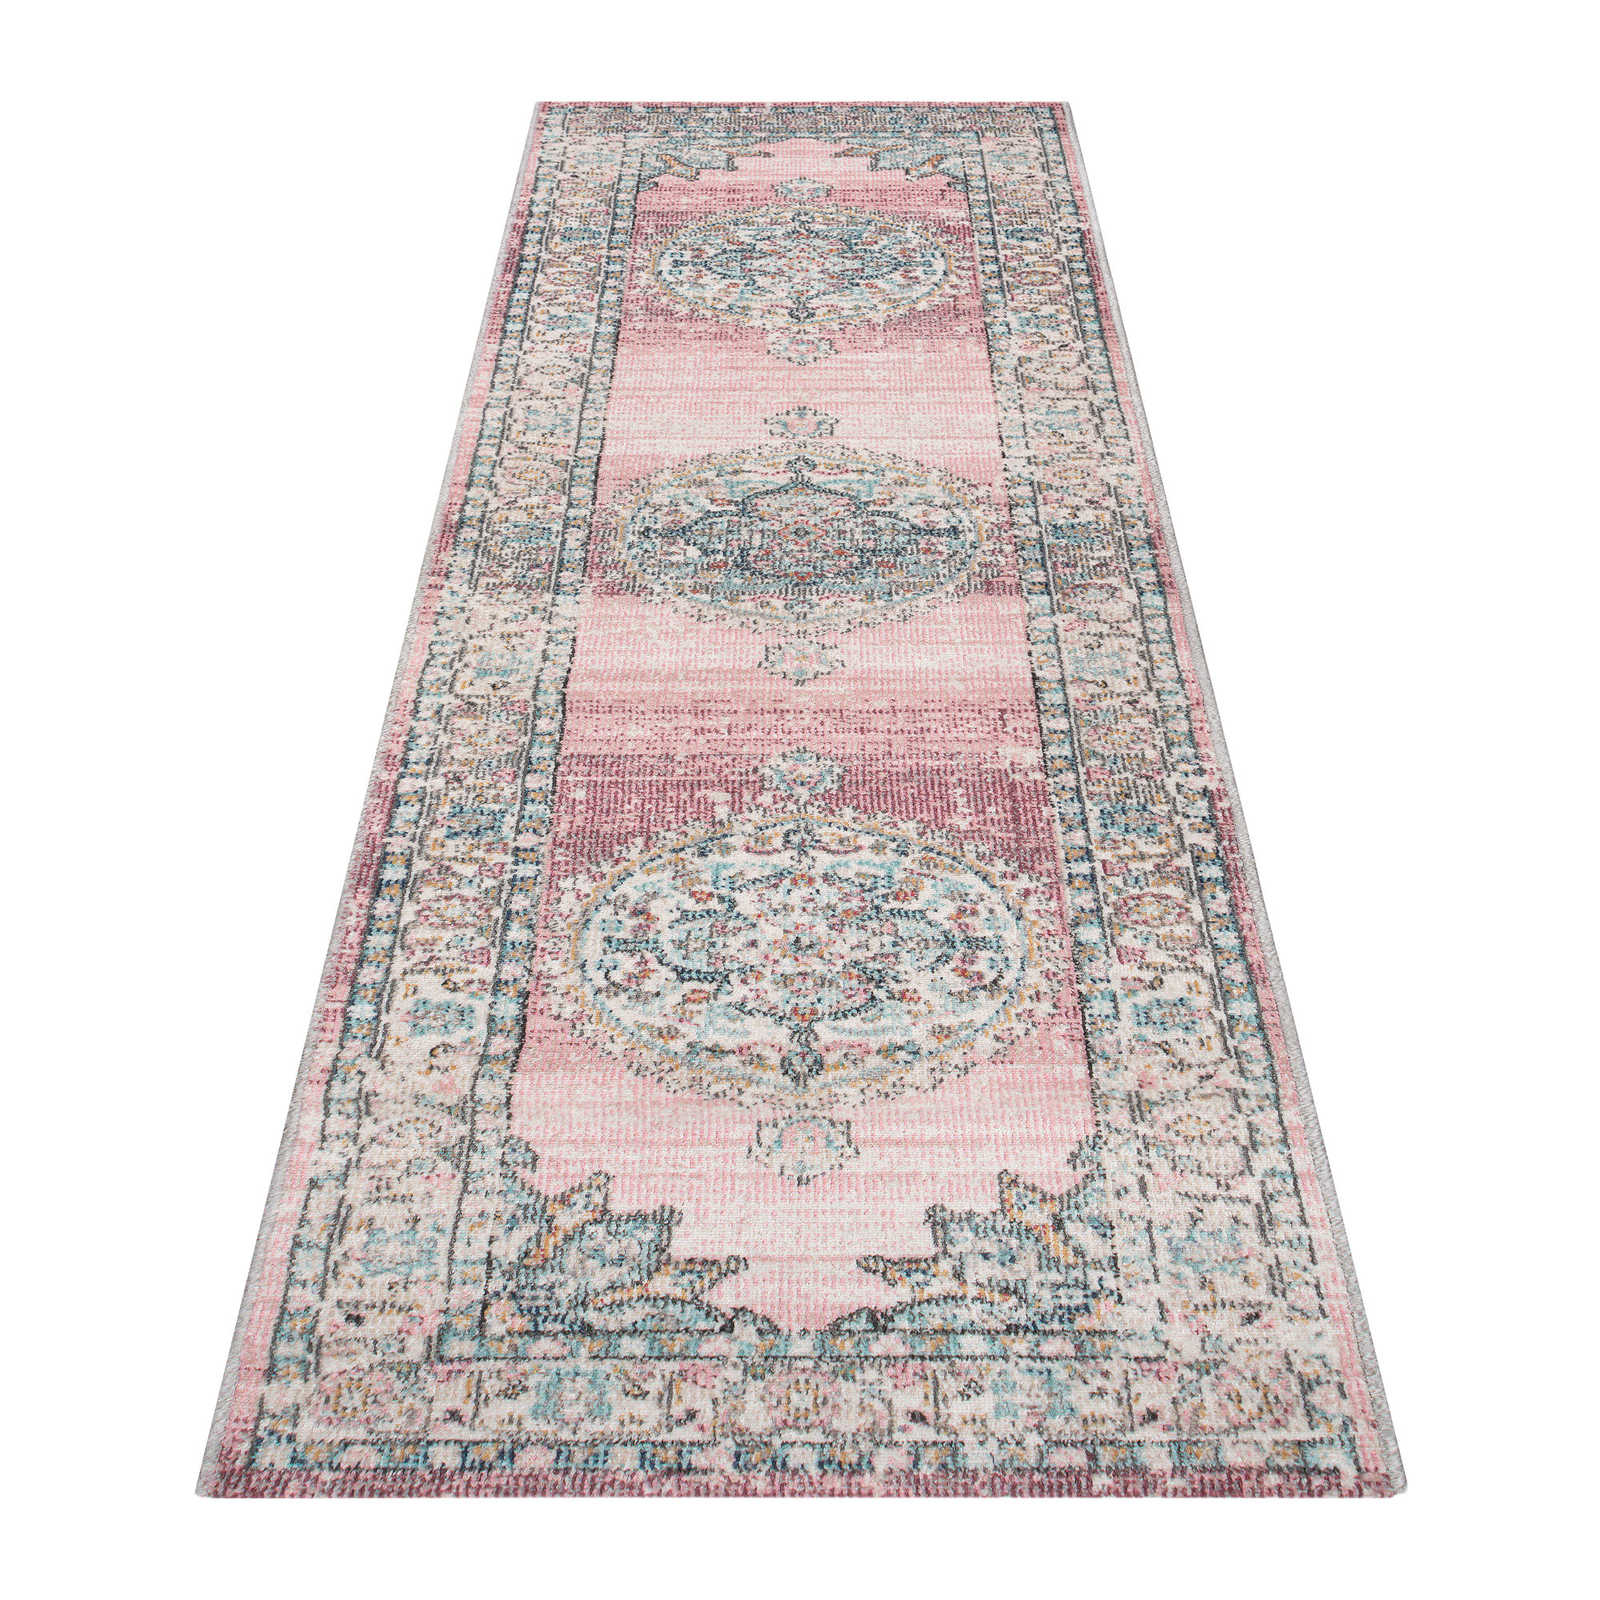 Flatweave Carpet with Pink Accents as Runner - 300 x 80 cm
